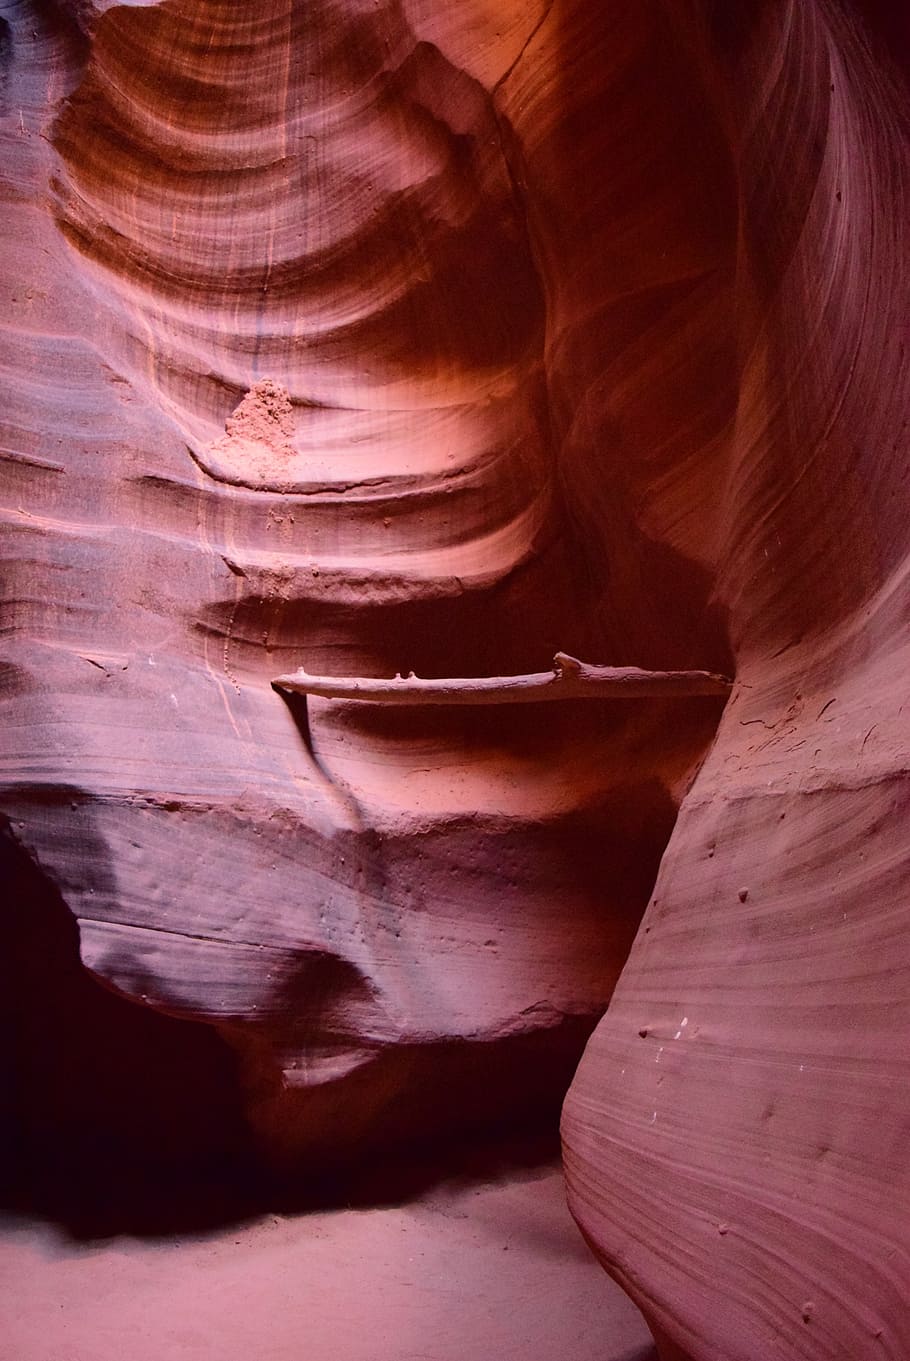 antelope canyon, mysterious, arizona, sand, wood, rock formation, rock, rock - object, canyon, solid